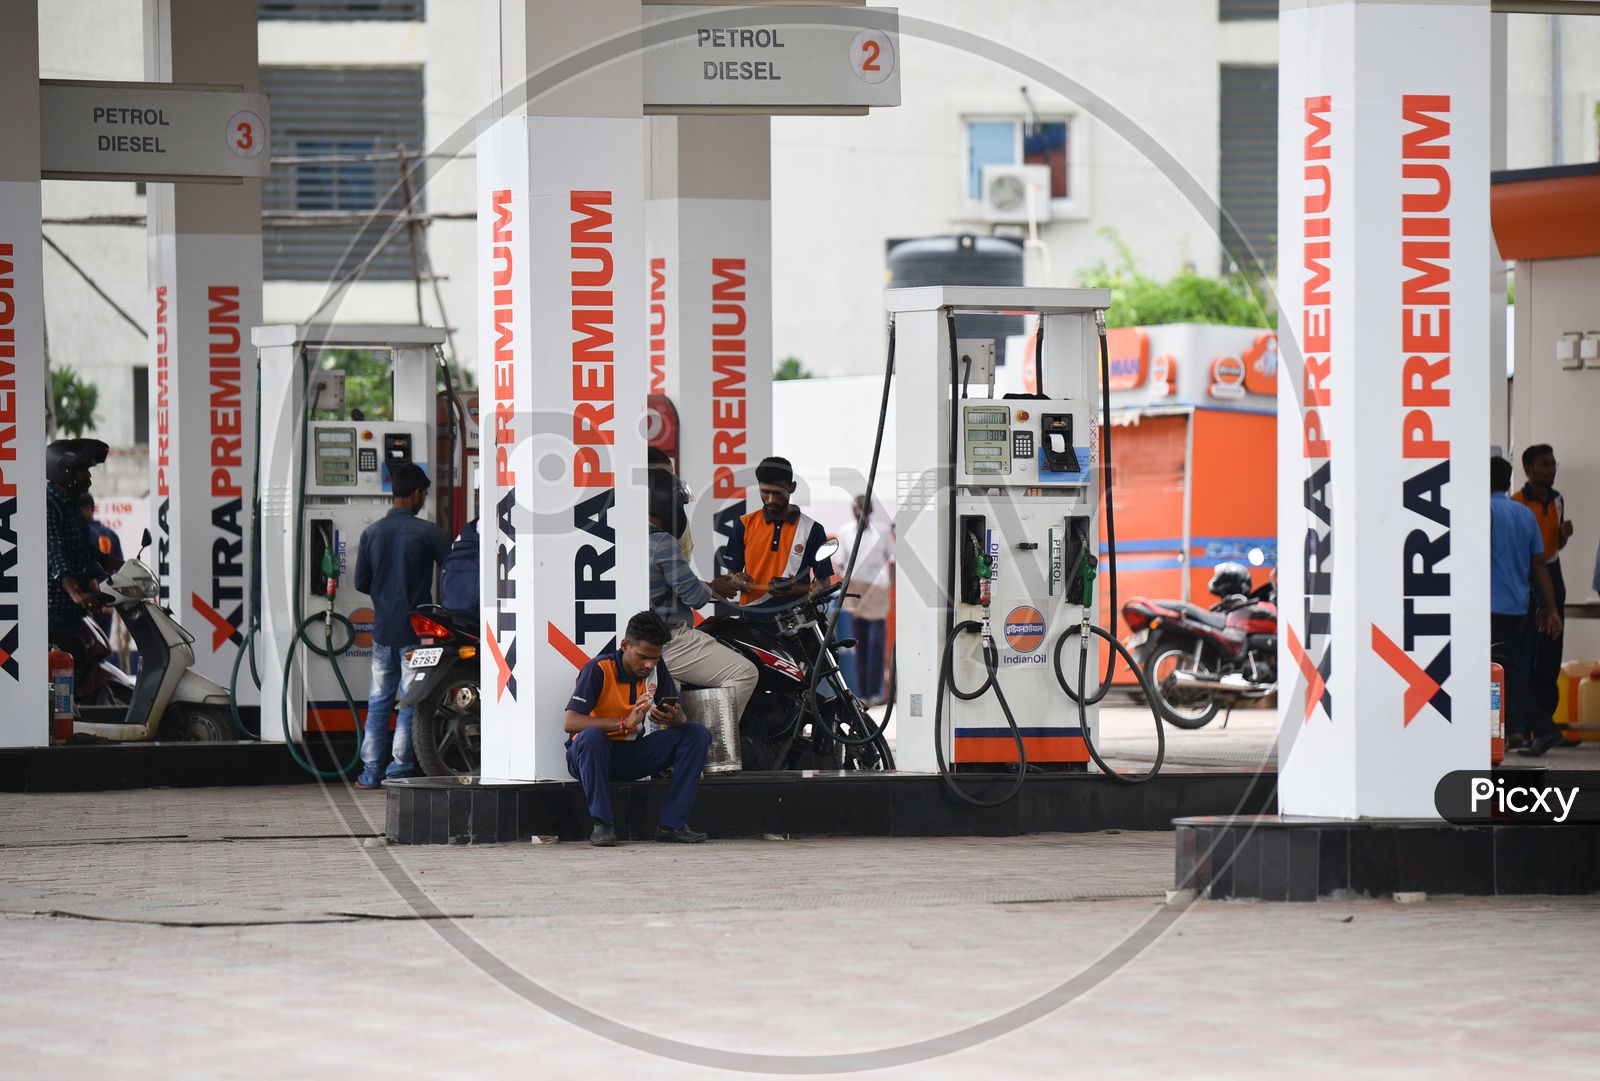 Indian Oil Petrol Bunk Or Fuel Station